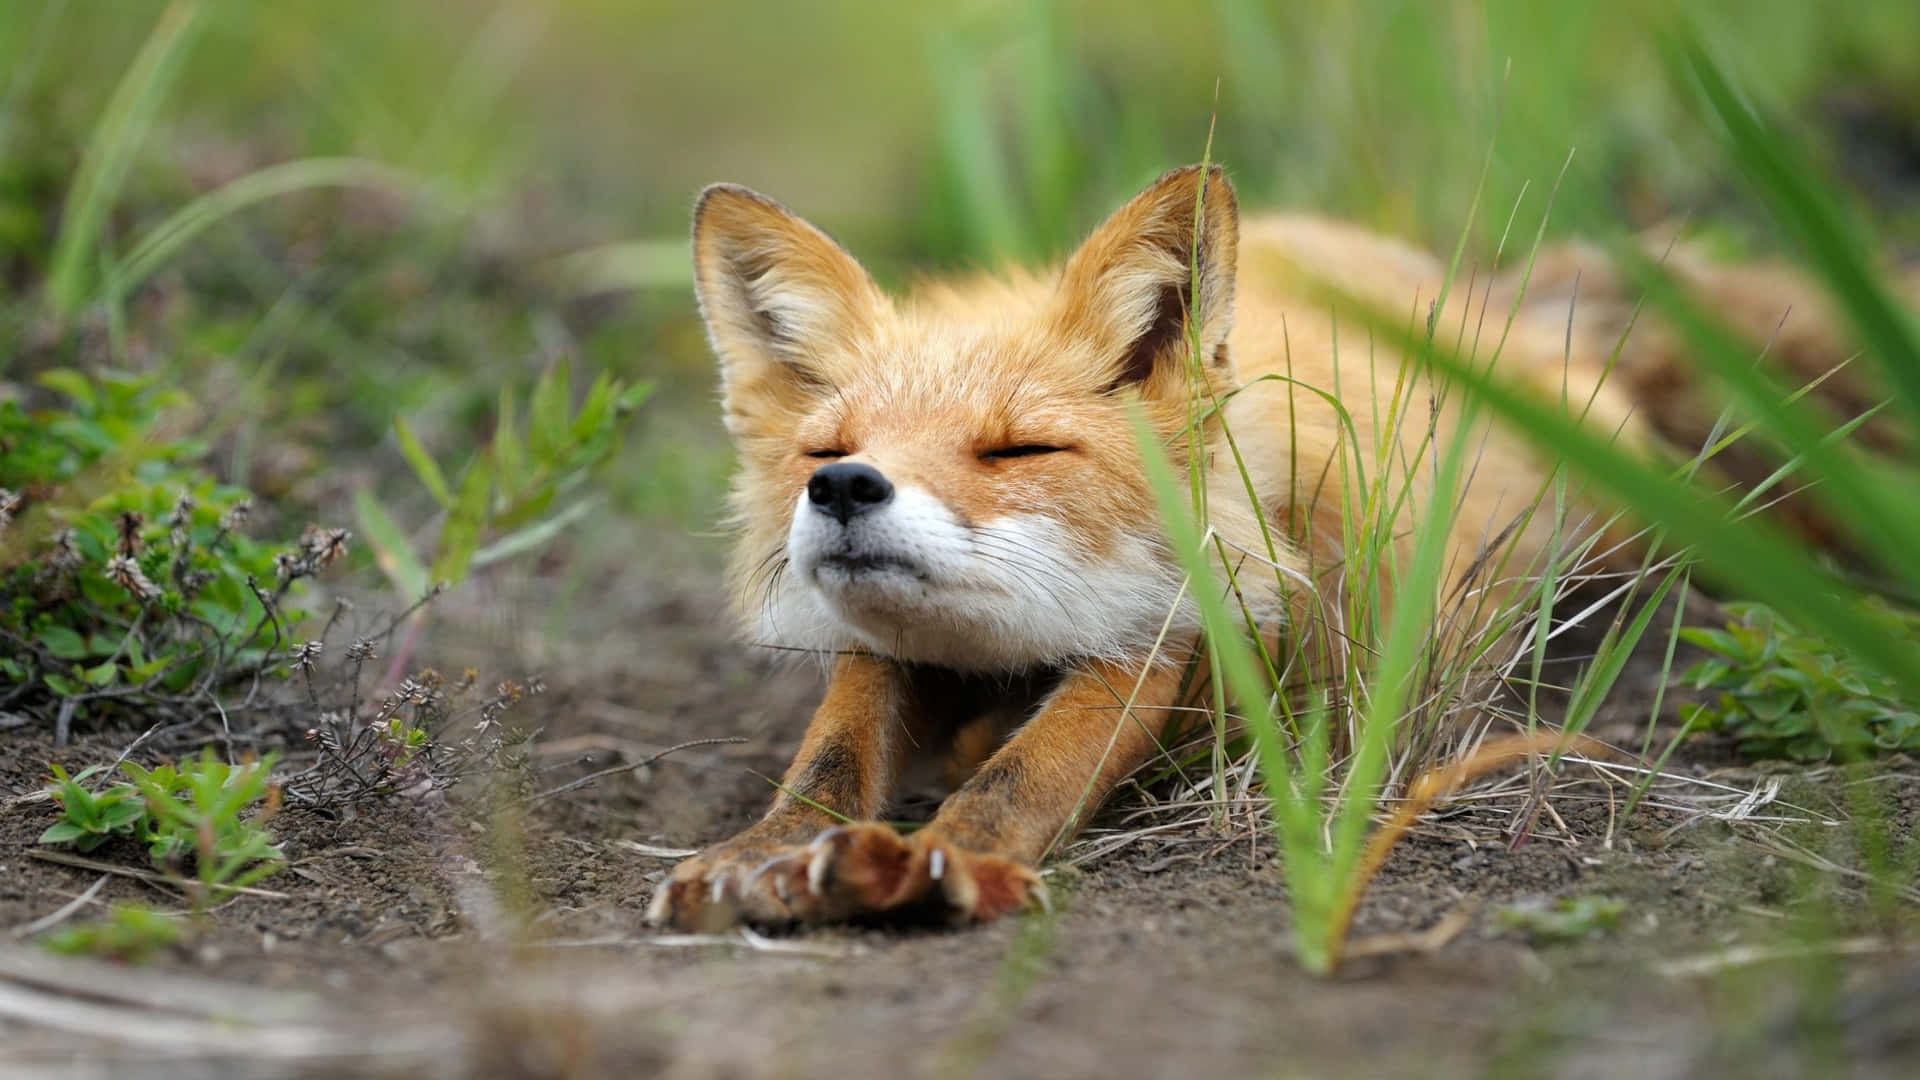 Look at this adorable fox!